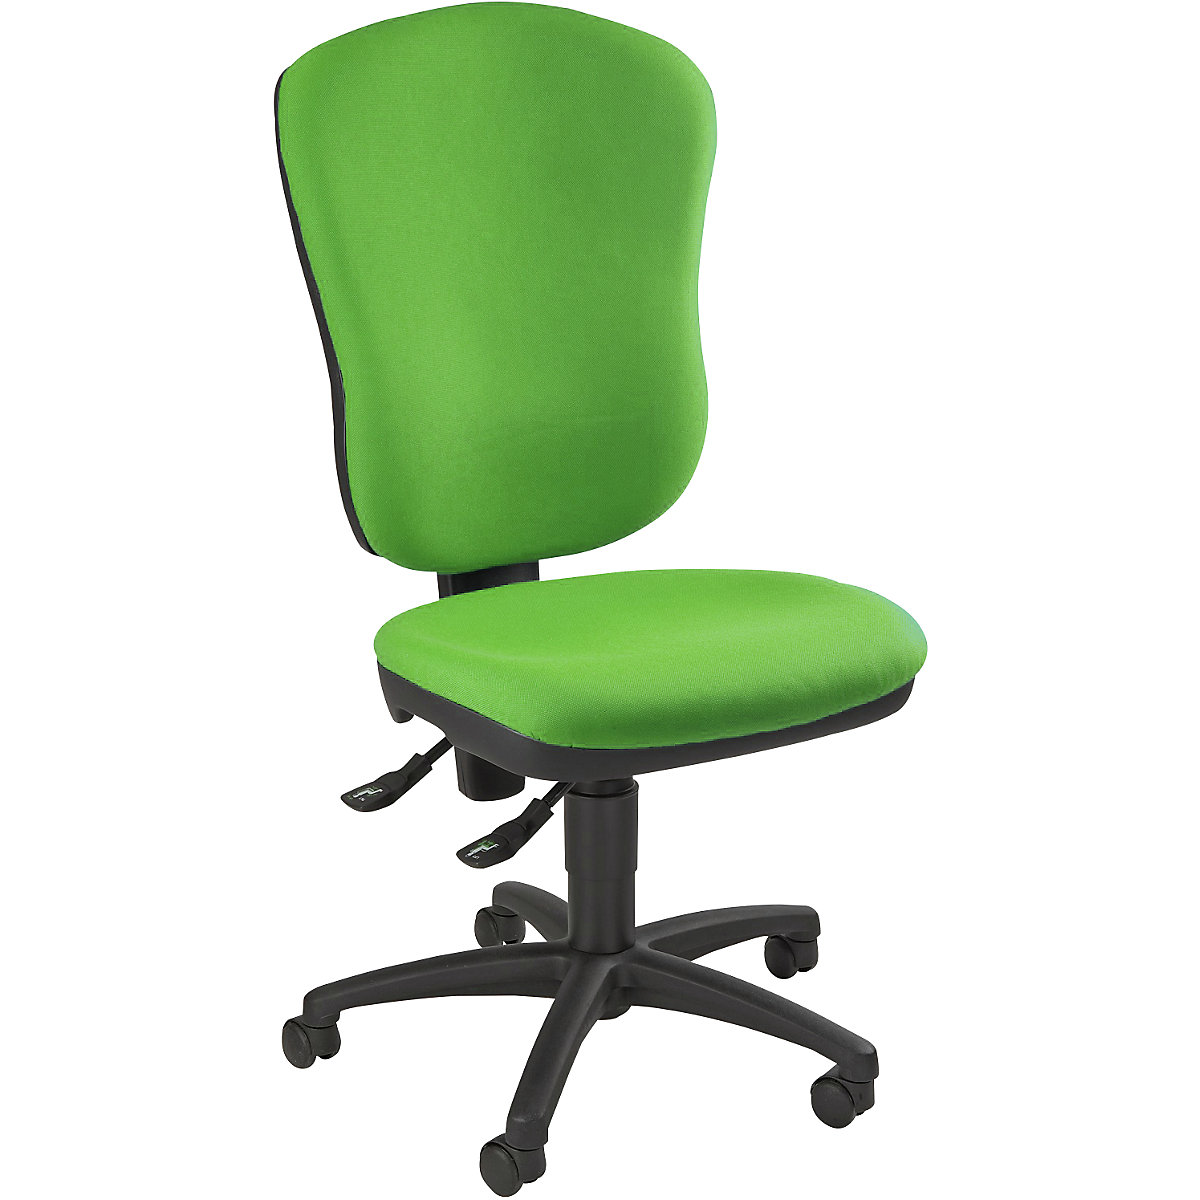 Standard swivel chair – Topstar, without arm rests, with lumbar support, back rest height 570 mm, apple green covering-4